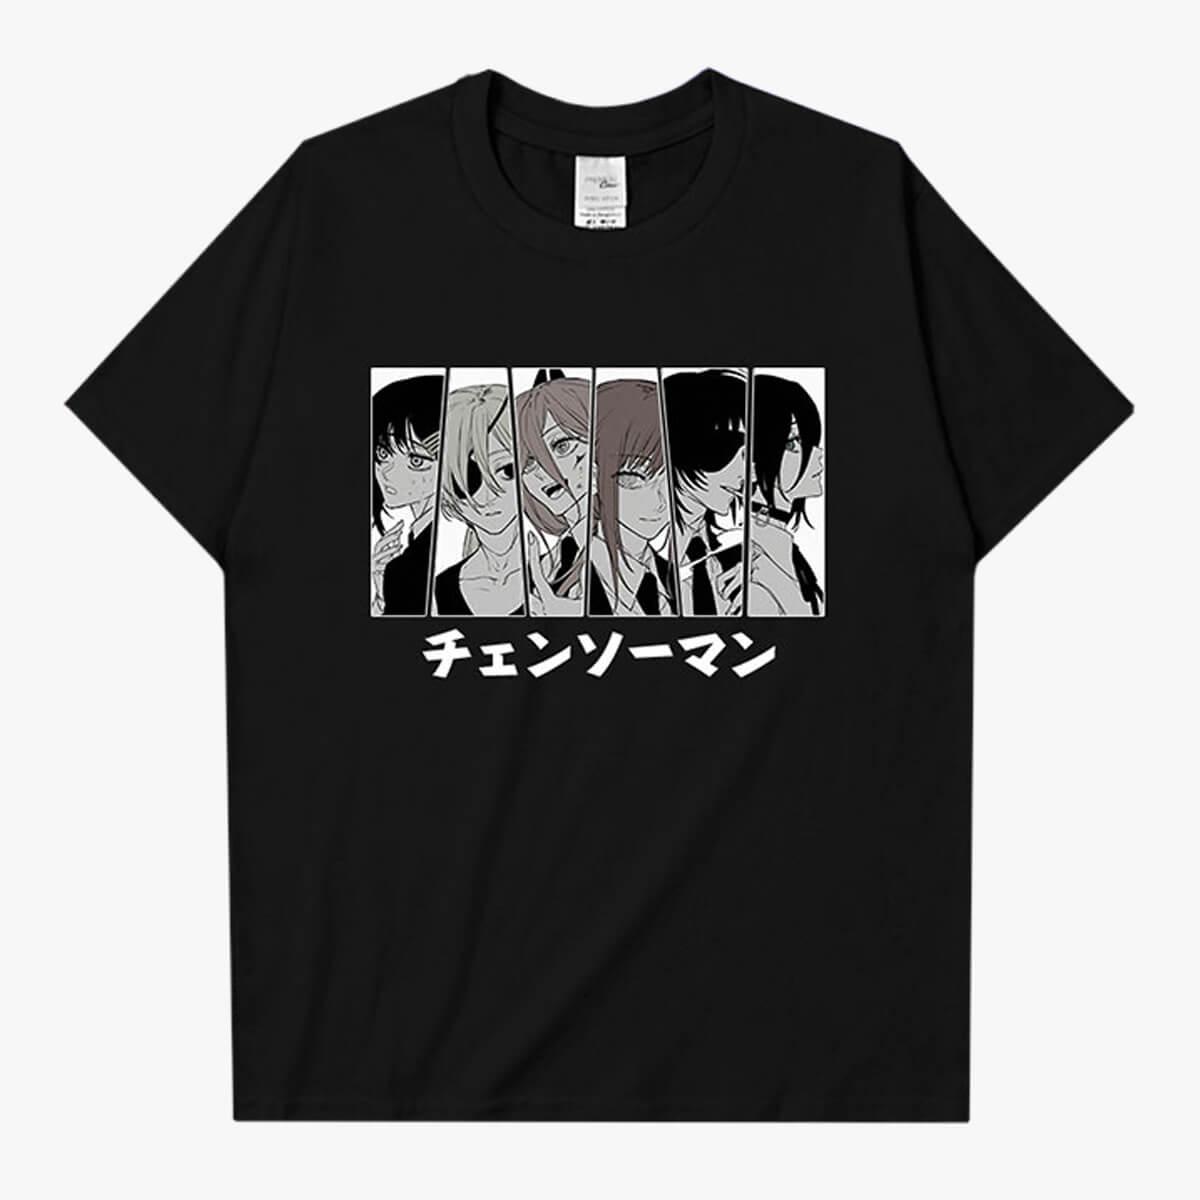 Chainsaw Man Manga Girl Characters Art T-Shirt - Aesthetic Clothes Shop